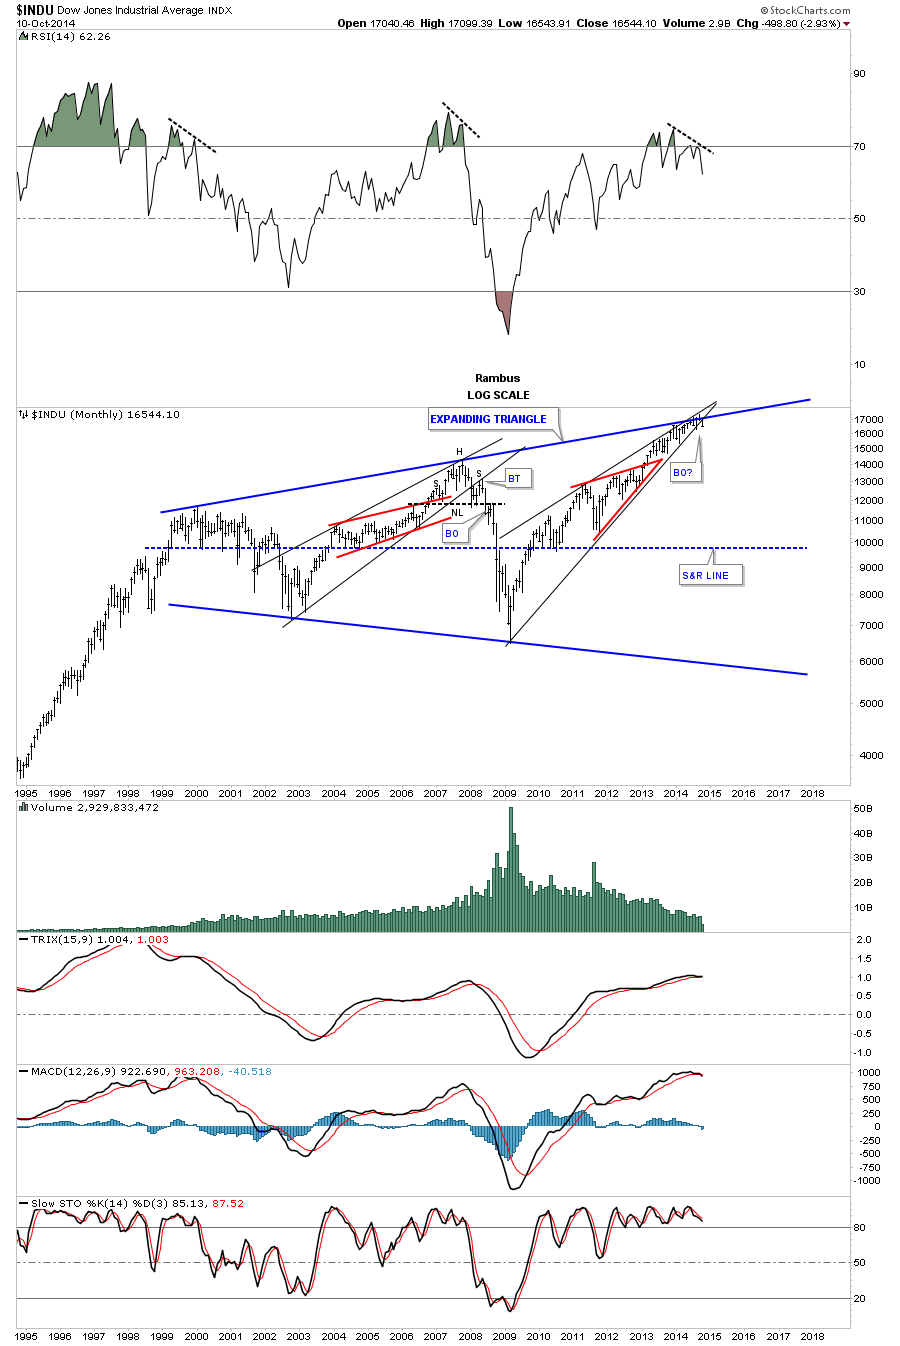 Dow Monthly with Expanding Triangle